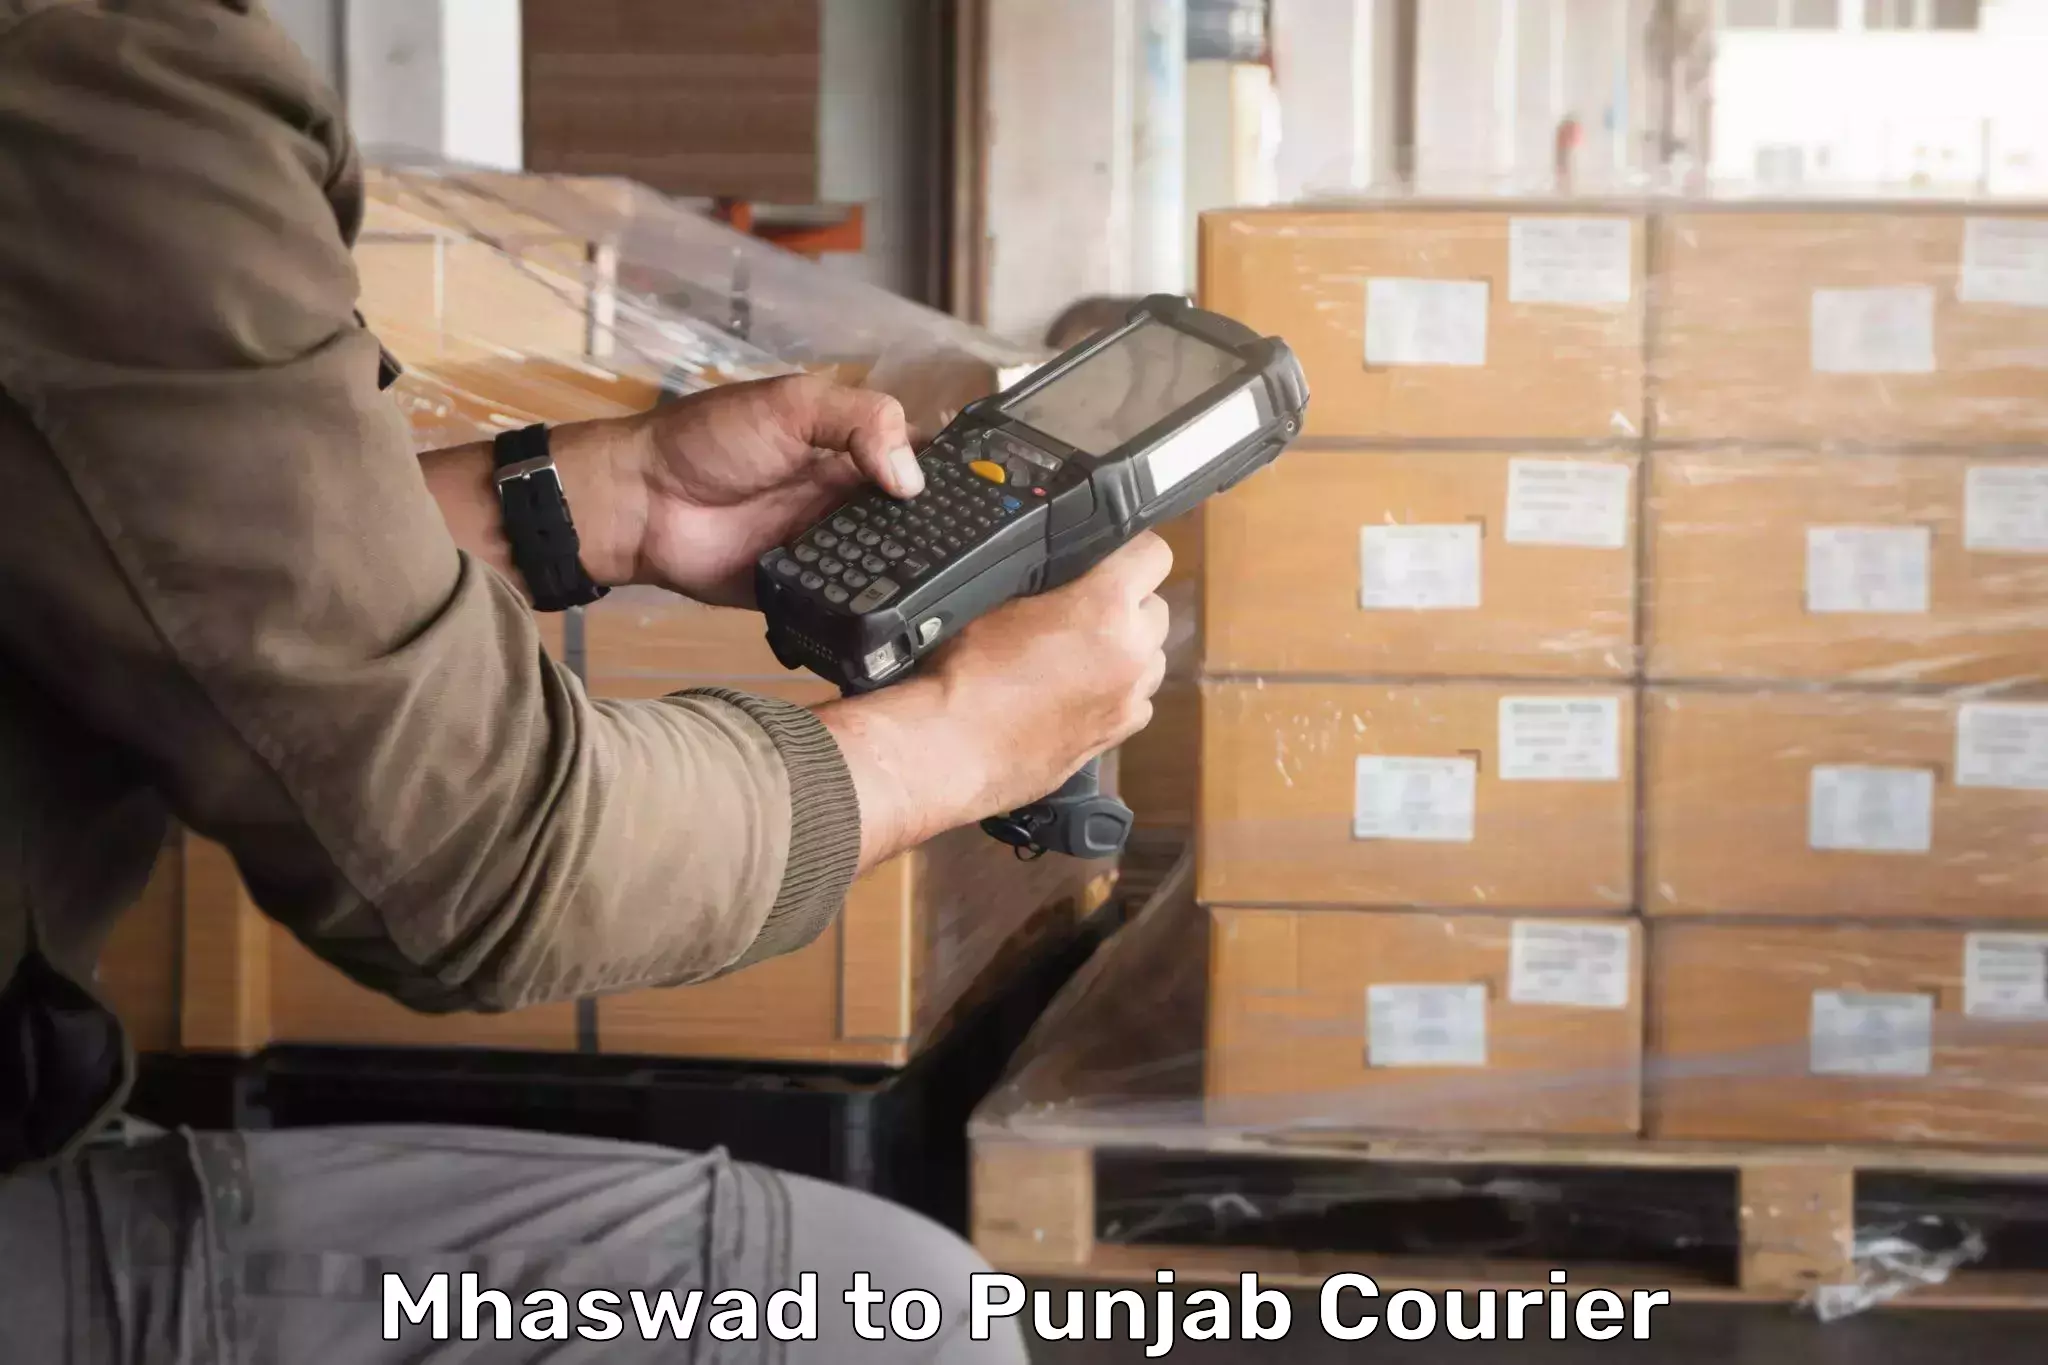 Efficient courier operations Mhaswad to Amritsar